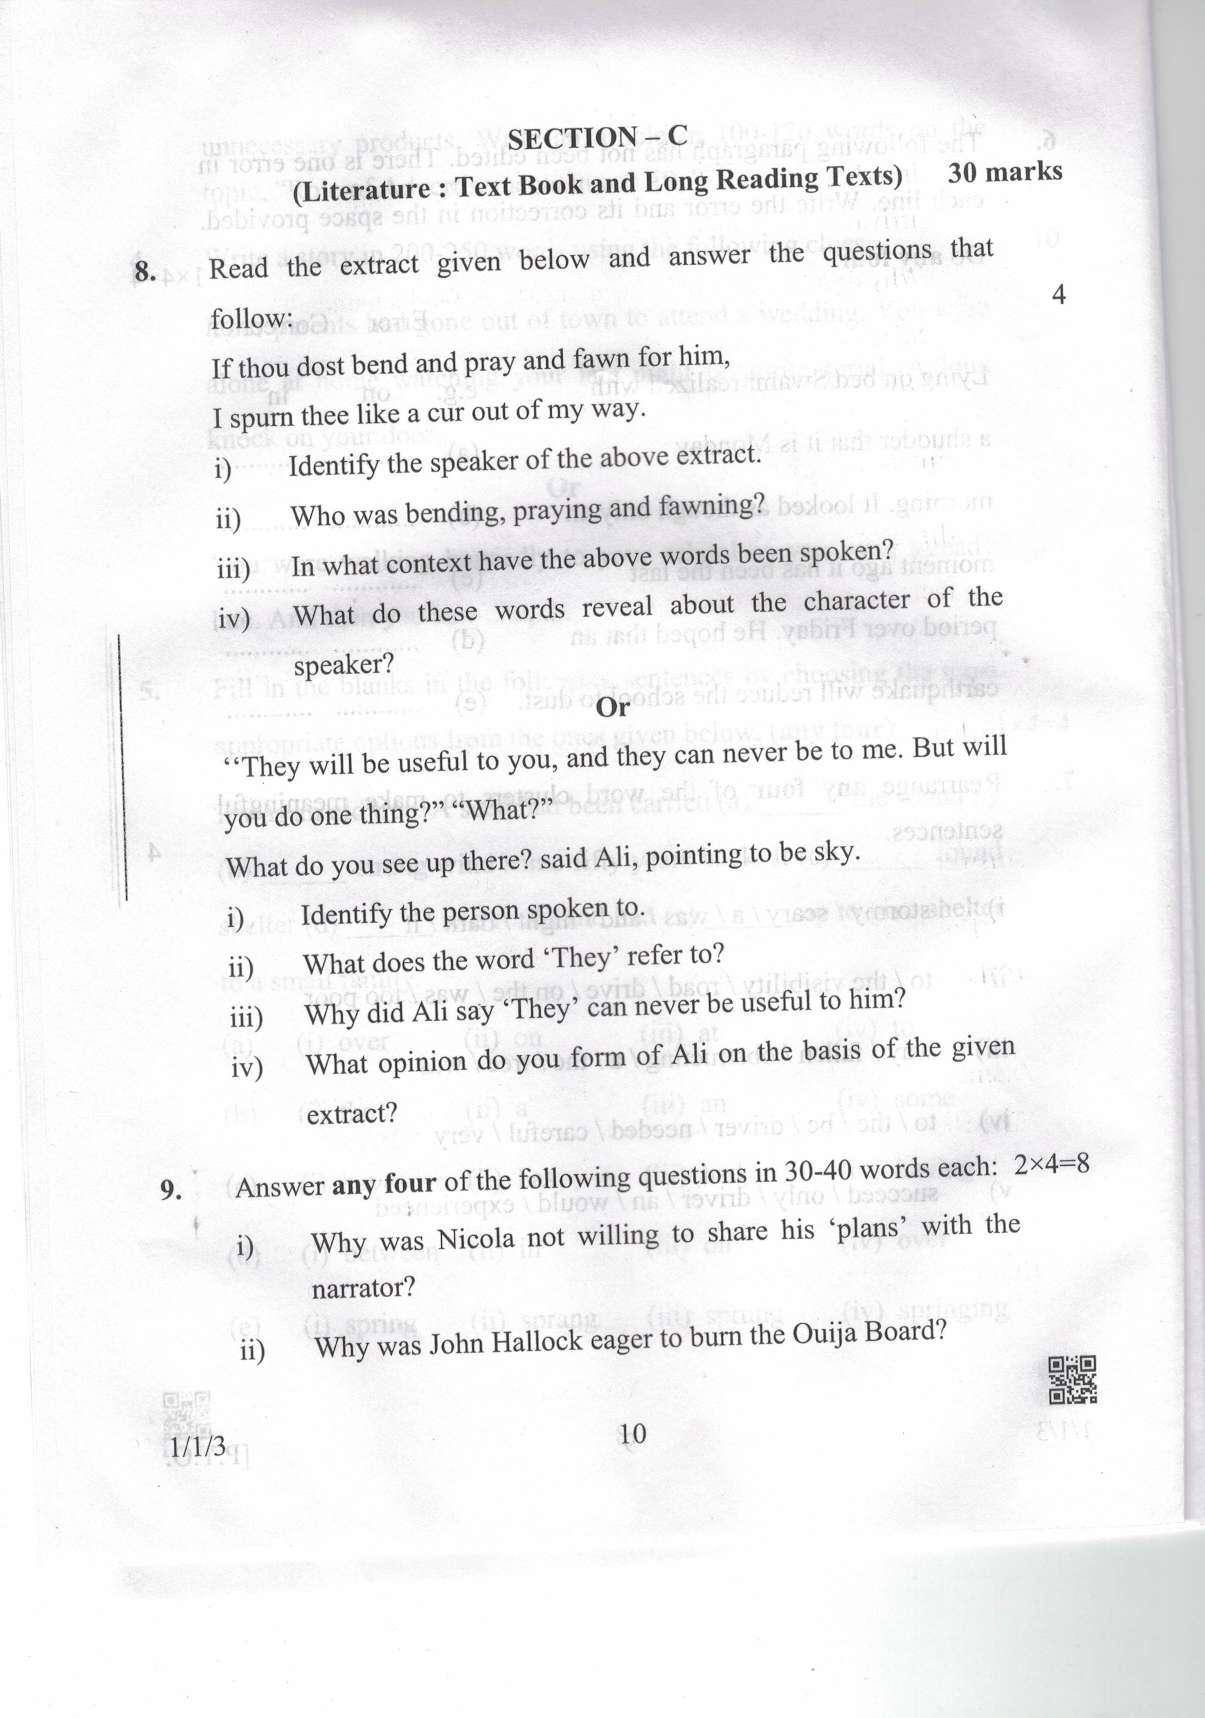 CBSE Class 10 1-1-3 Eng. Comm. 2019 Question Paper - Page 10